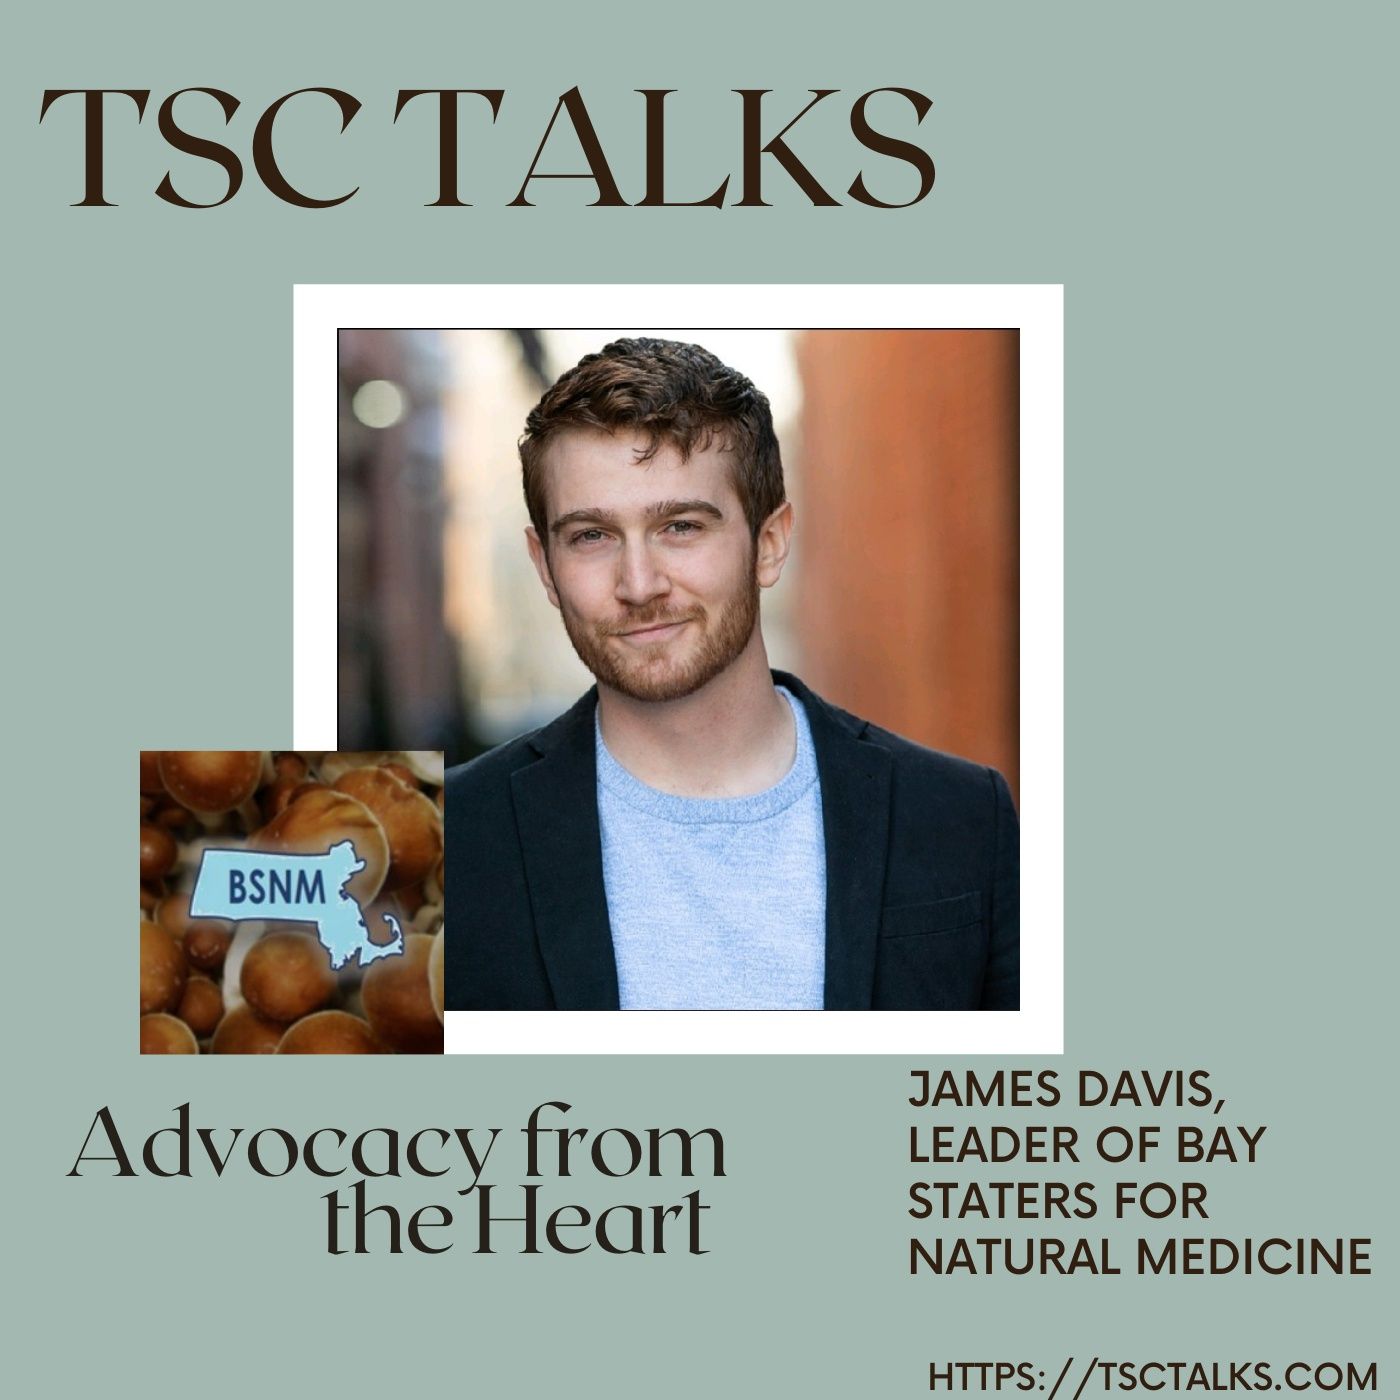 TSC Talks! Points of Light, James Davis of Bay Staters for Natural Medicine-"Advocacy from the Heart"